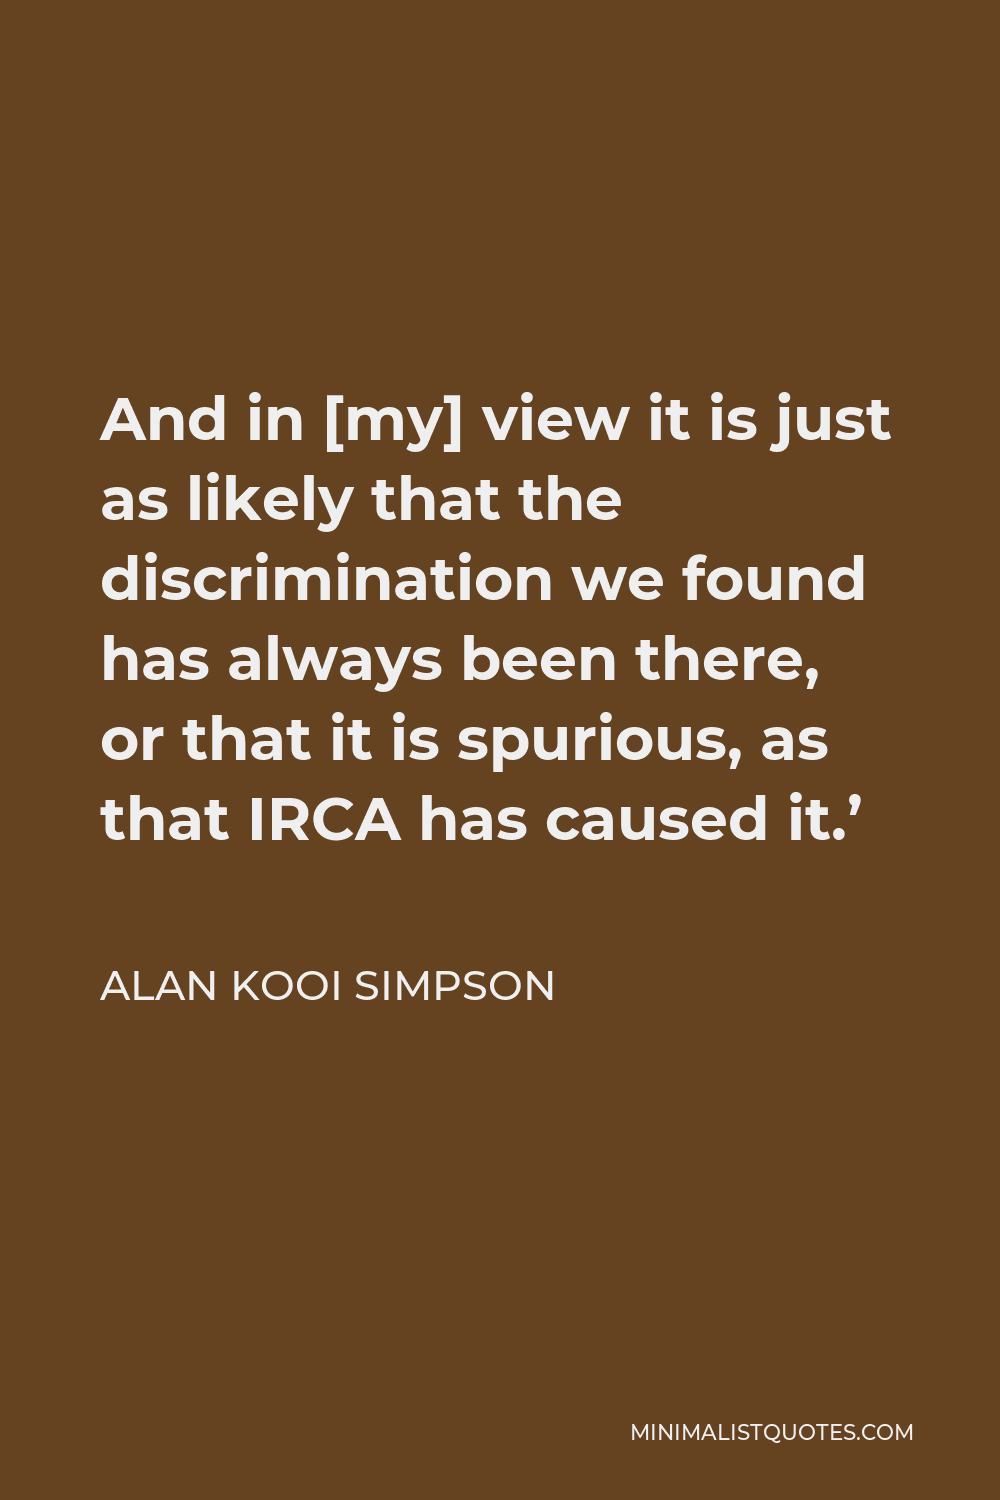 Alan Kooi Simpson Quote - And in [my] view it is just as likely that the discrimination we found has always been there, or that it is spurious, as that IRCA has caused it.’